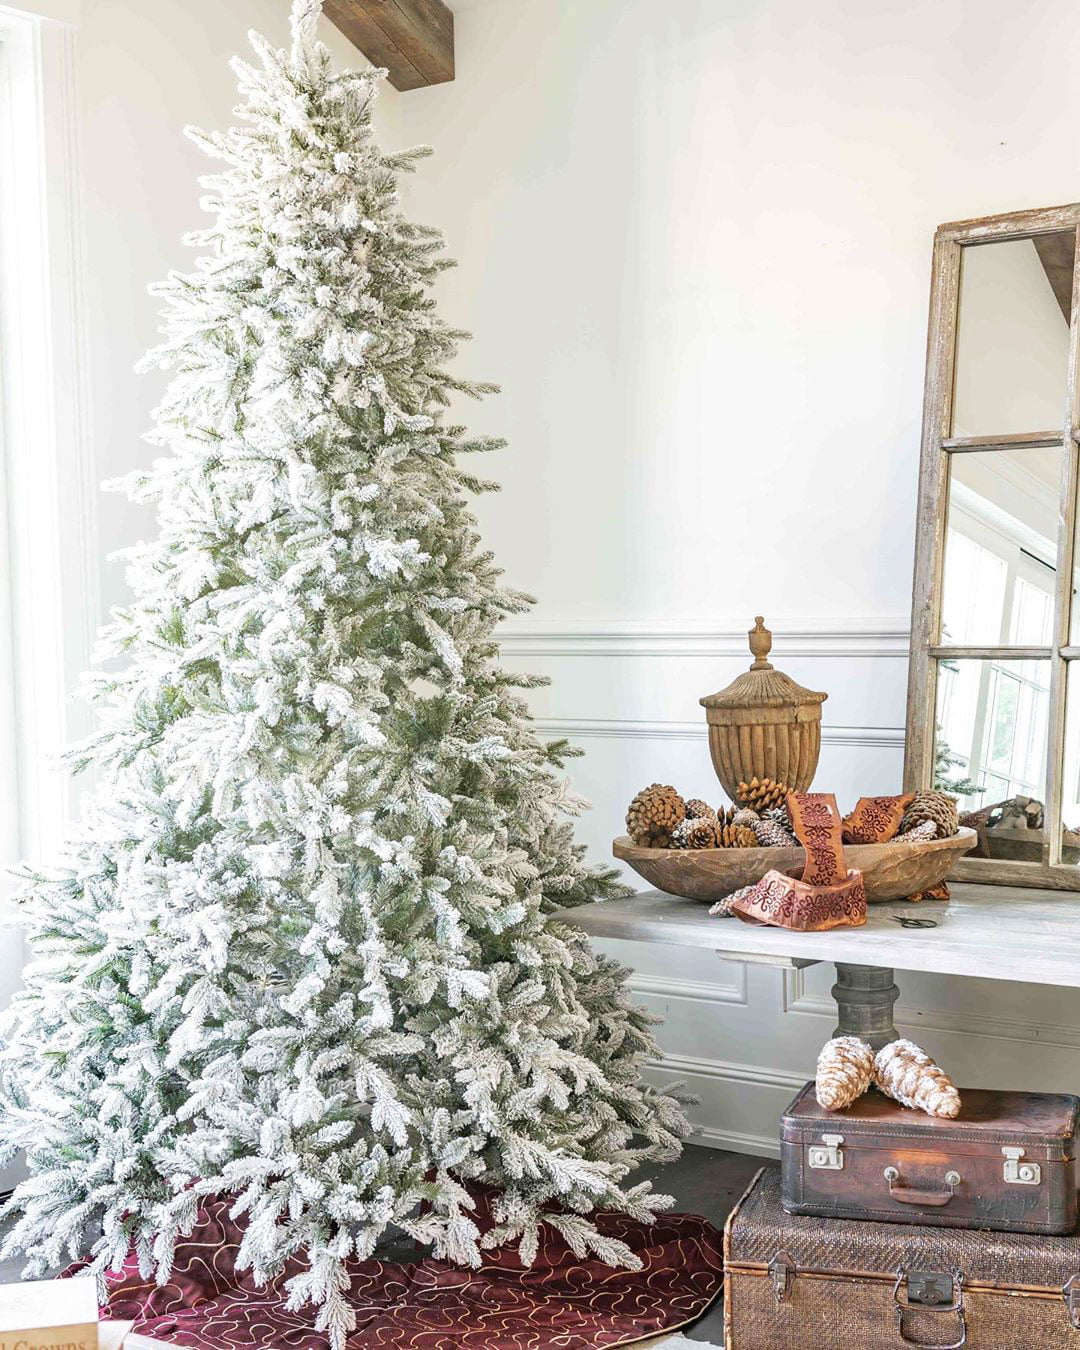 Traditional And Original Decorations-christmas tree decorating ideas pictures